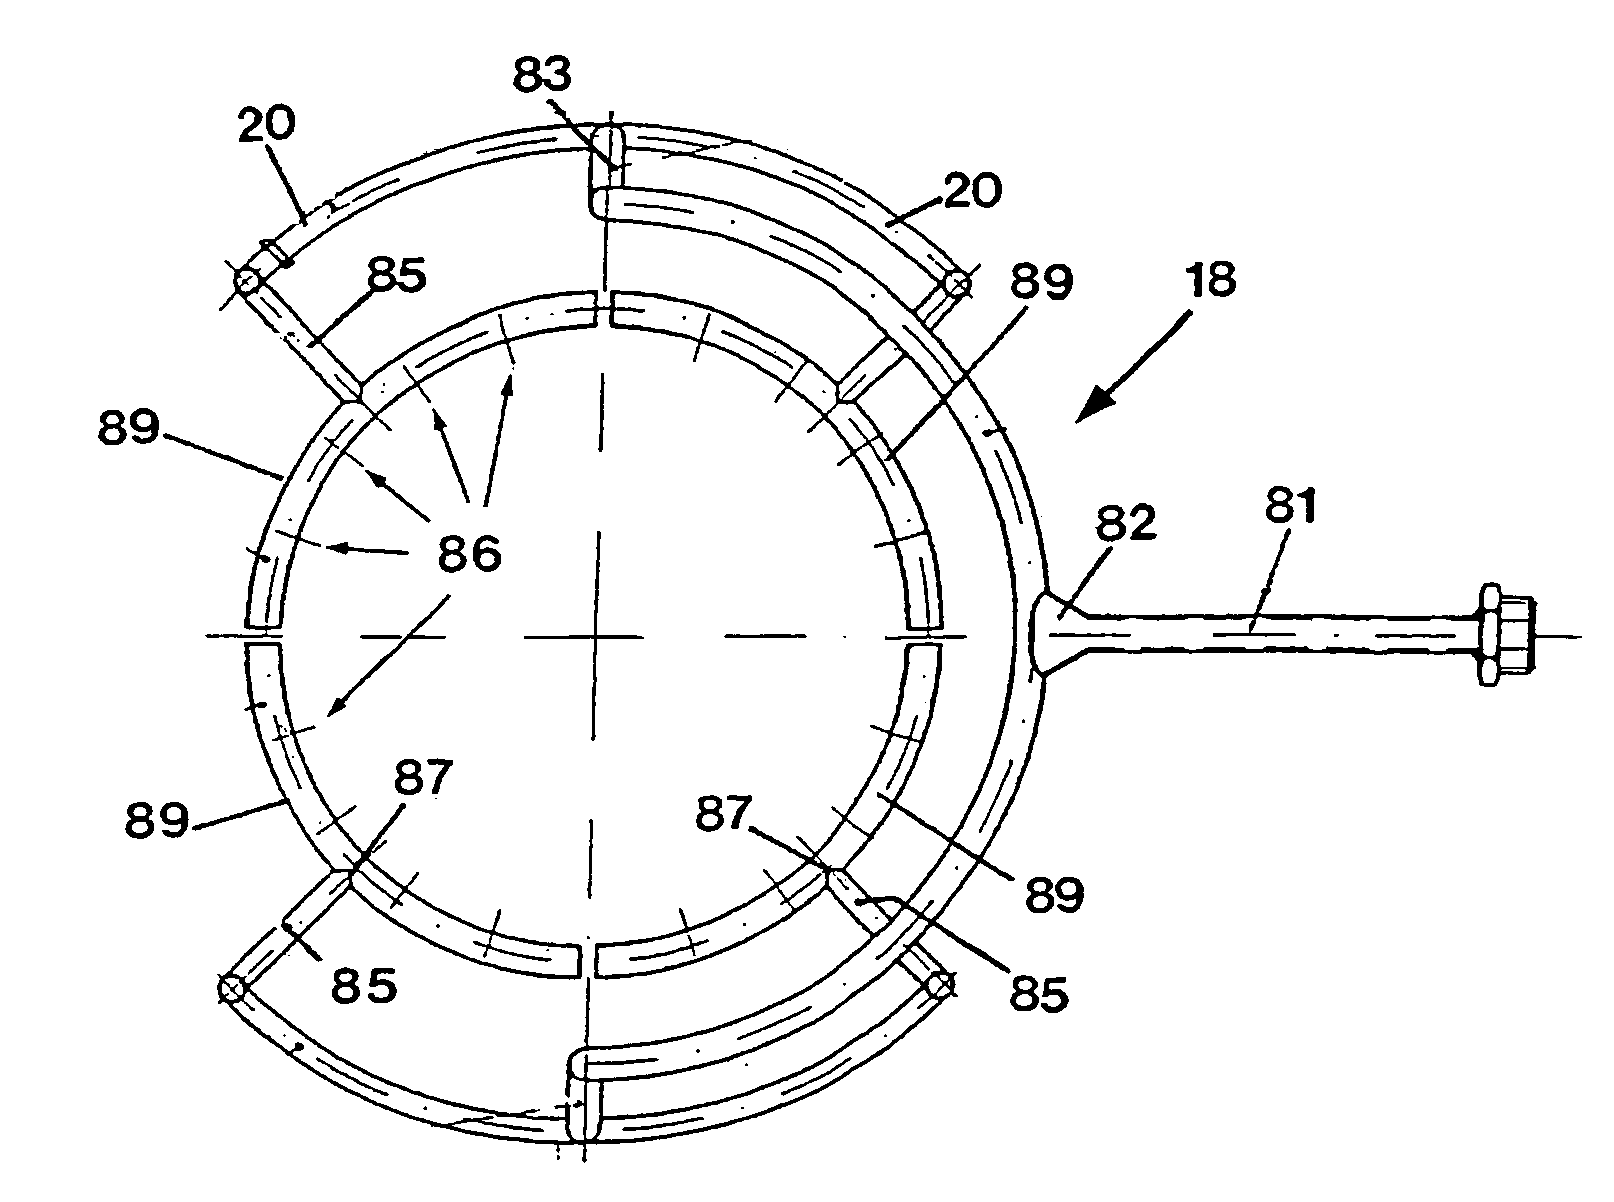 Resistance furnace with tubular heating element